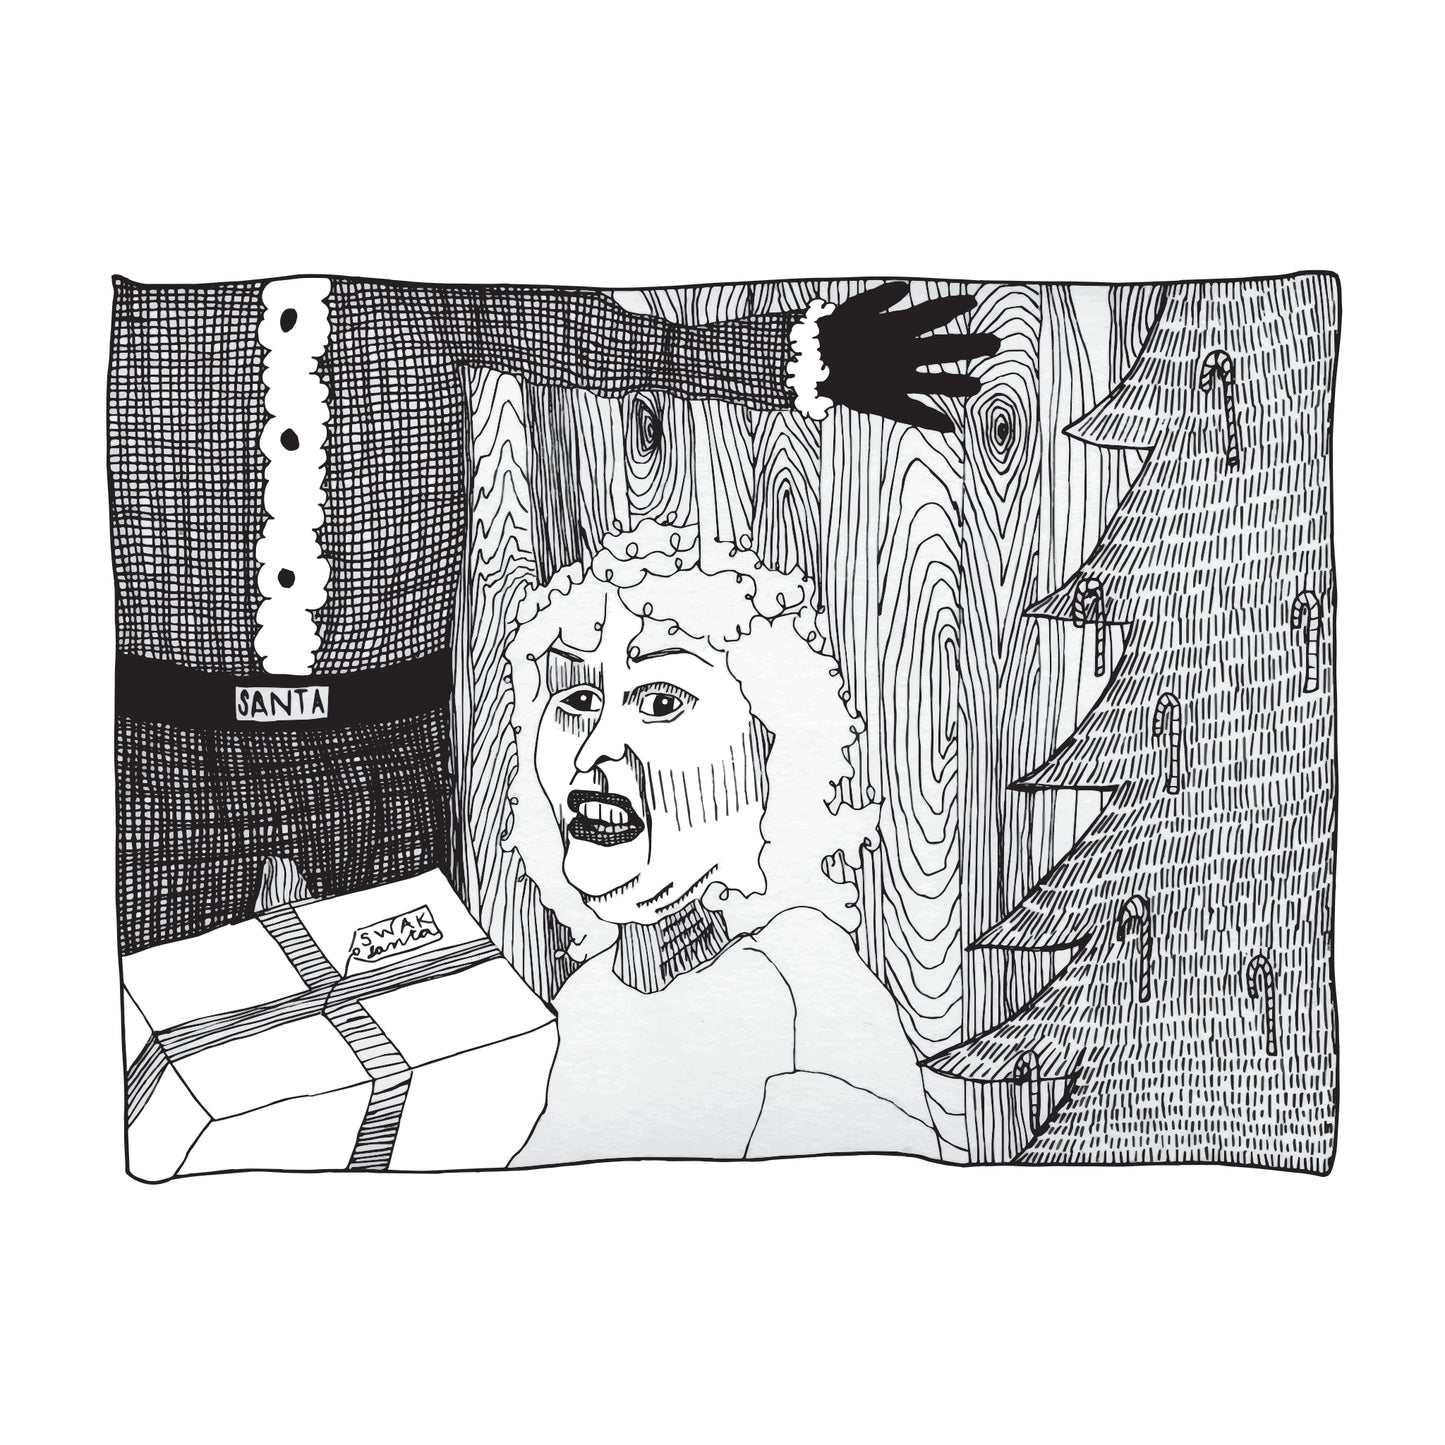 black and white illustration of a creeped out woman holding a gift with a tag that ready "SWAK, santa" while santa stands in the background with arms spread for a hug